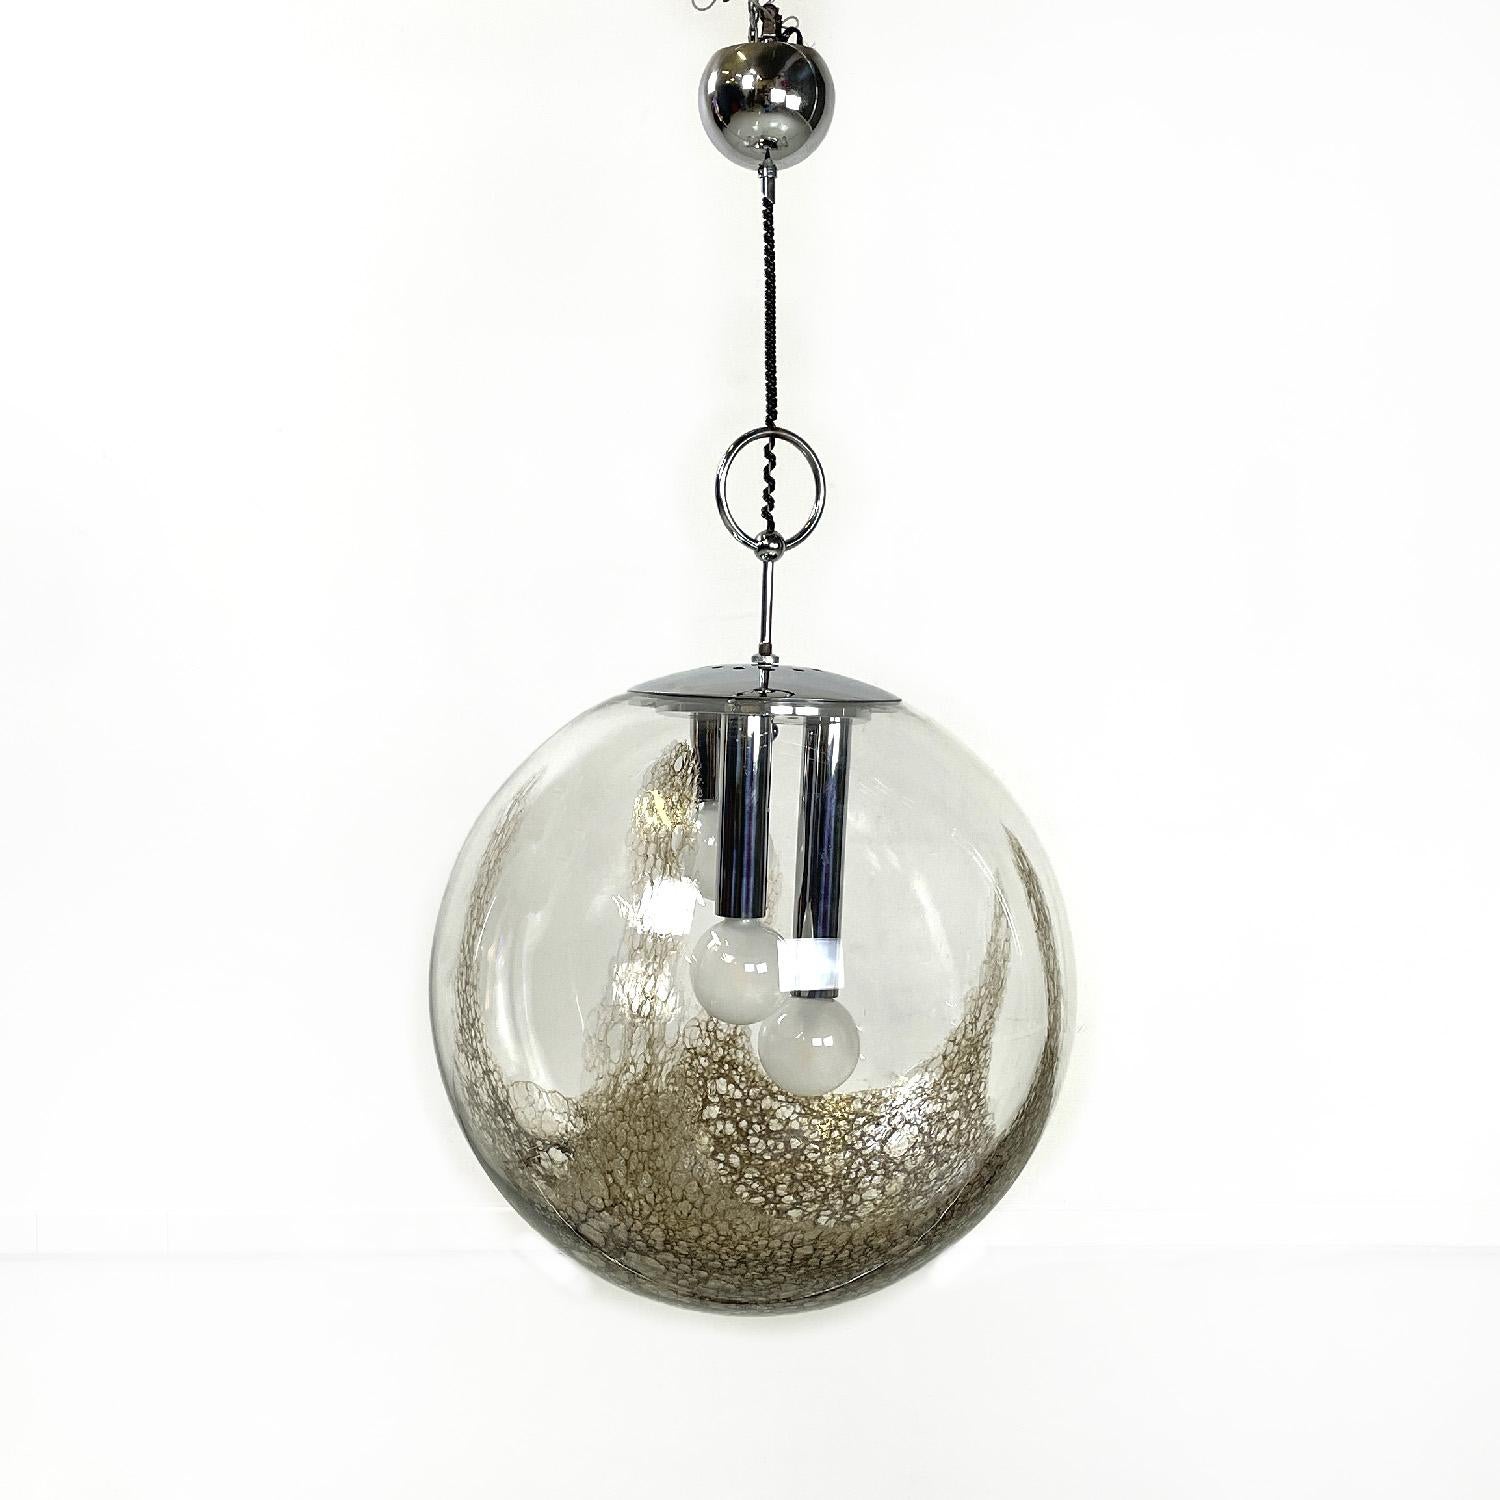 Italian modern Murano glass and chromed steel chandelier by La Murrina, 1970s
Suspension chandelier with globe diffuser in Murano pulegoso glass. In the lower part the globe has a decoration given by a bubble effect on the glass, which transforms